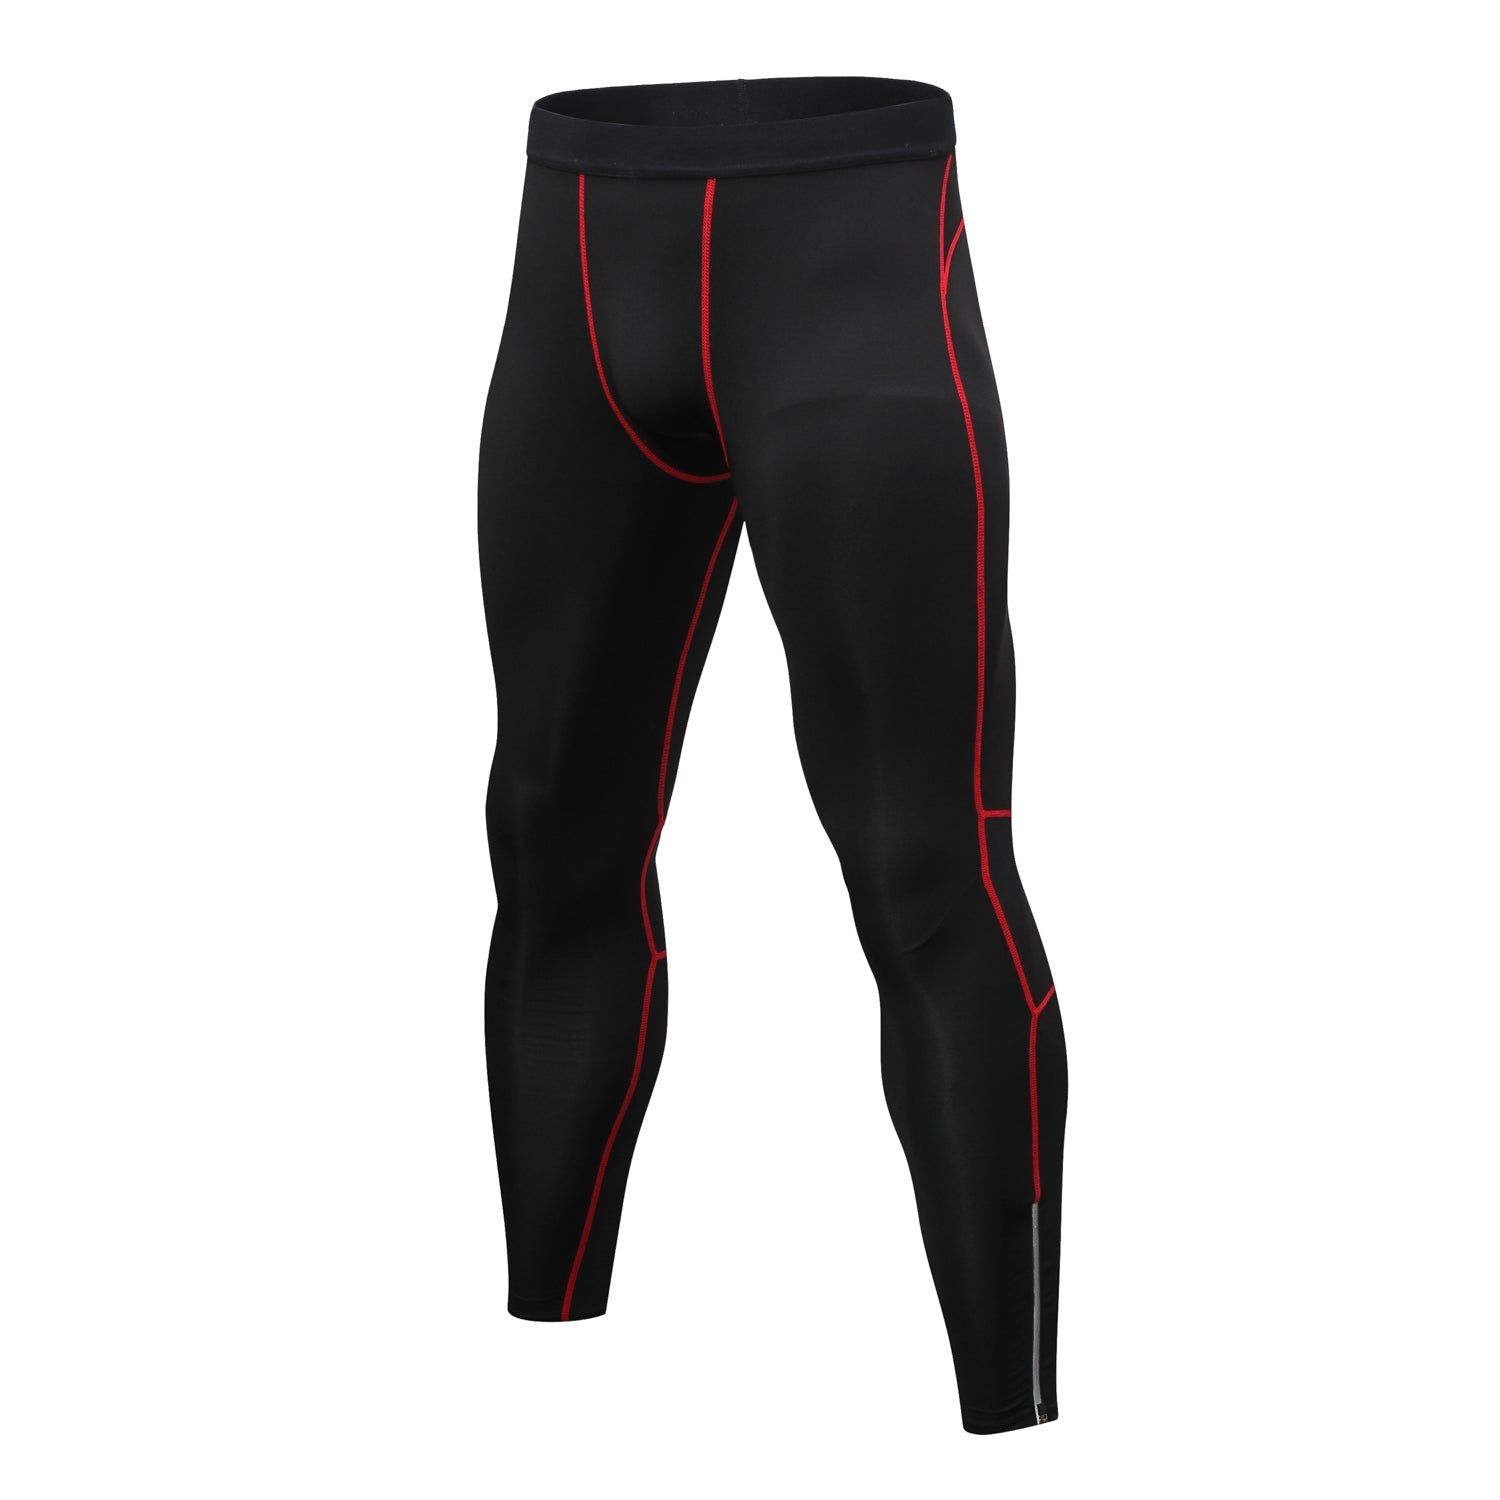 Men Thermal Compression Pants Athletic Workout Running Tights Base Layer  Bottoms